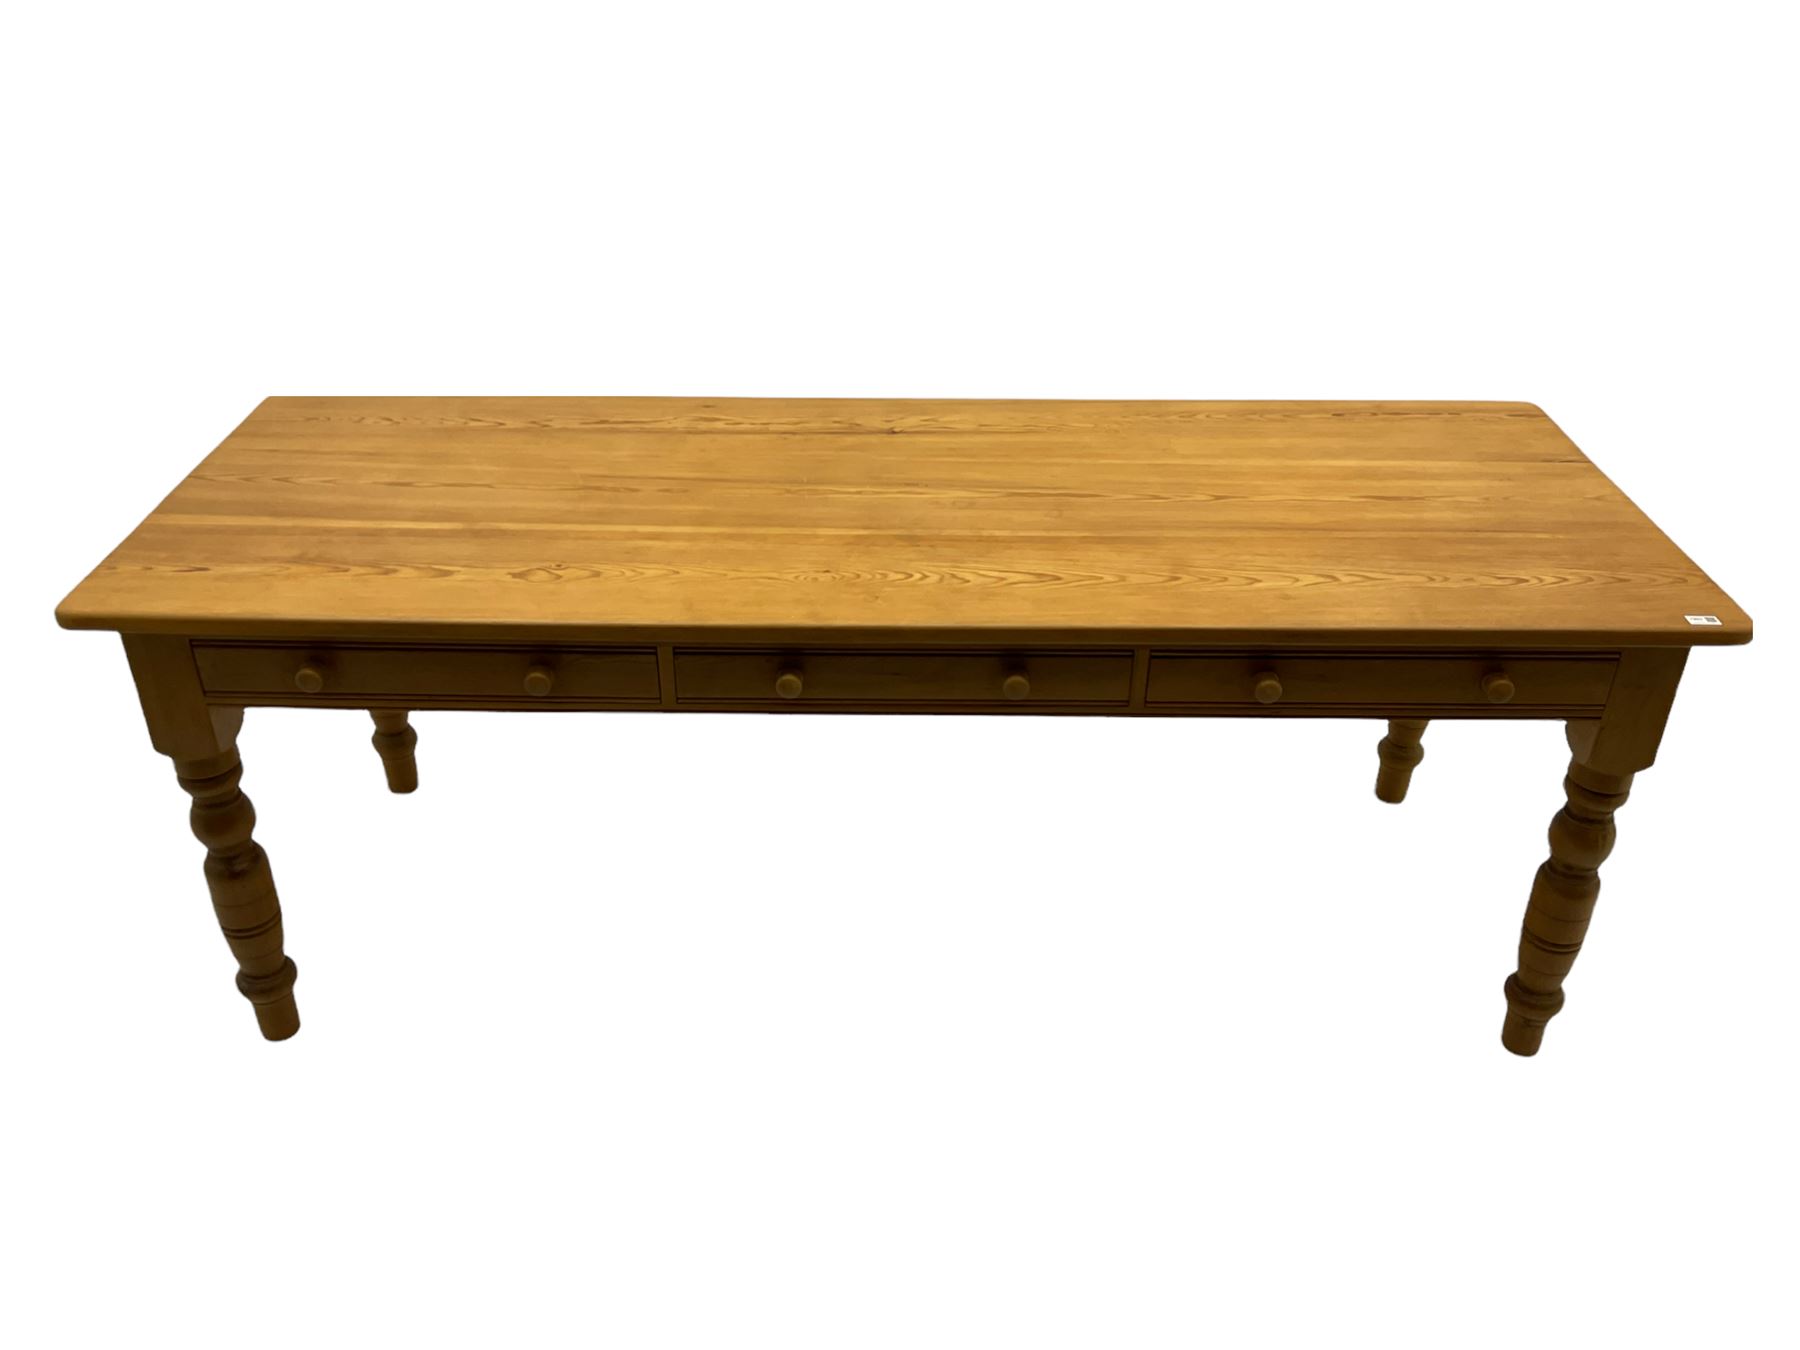 Farmhouse pine dining table - Image 2 of 4